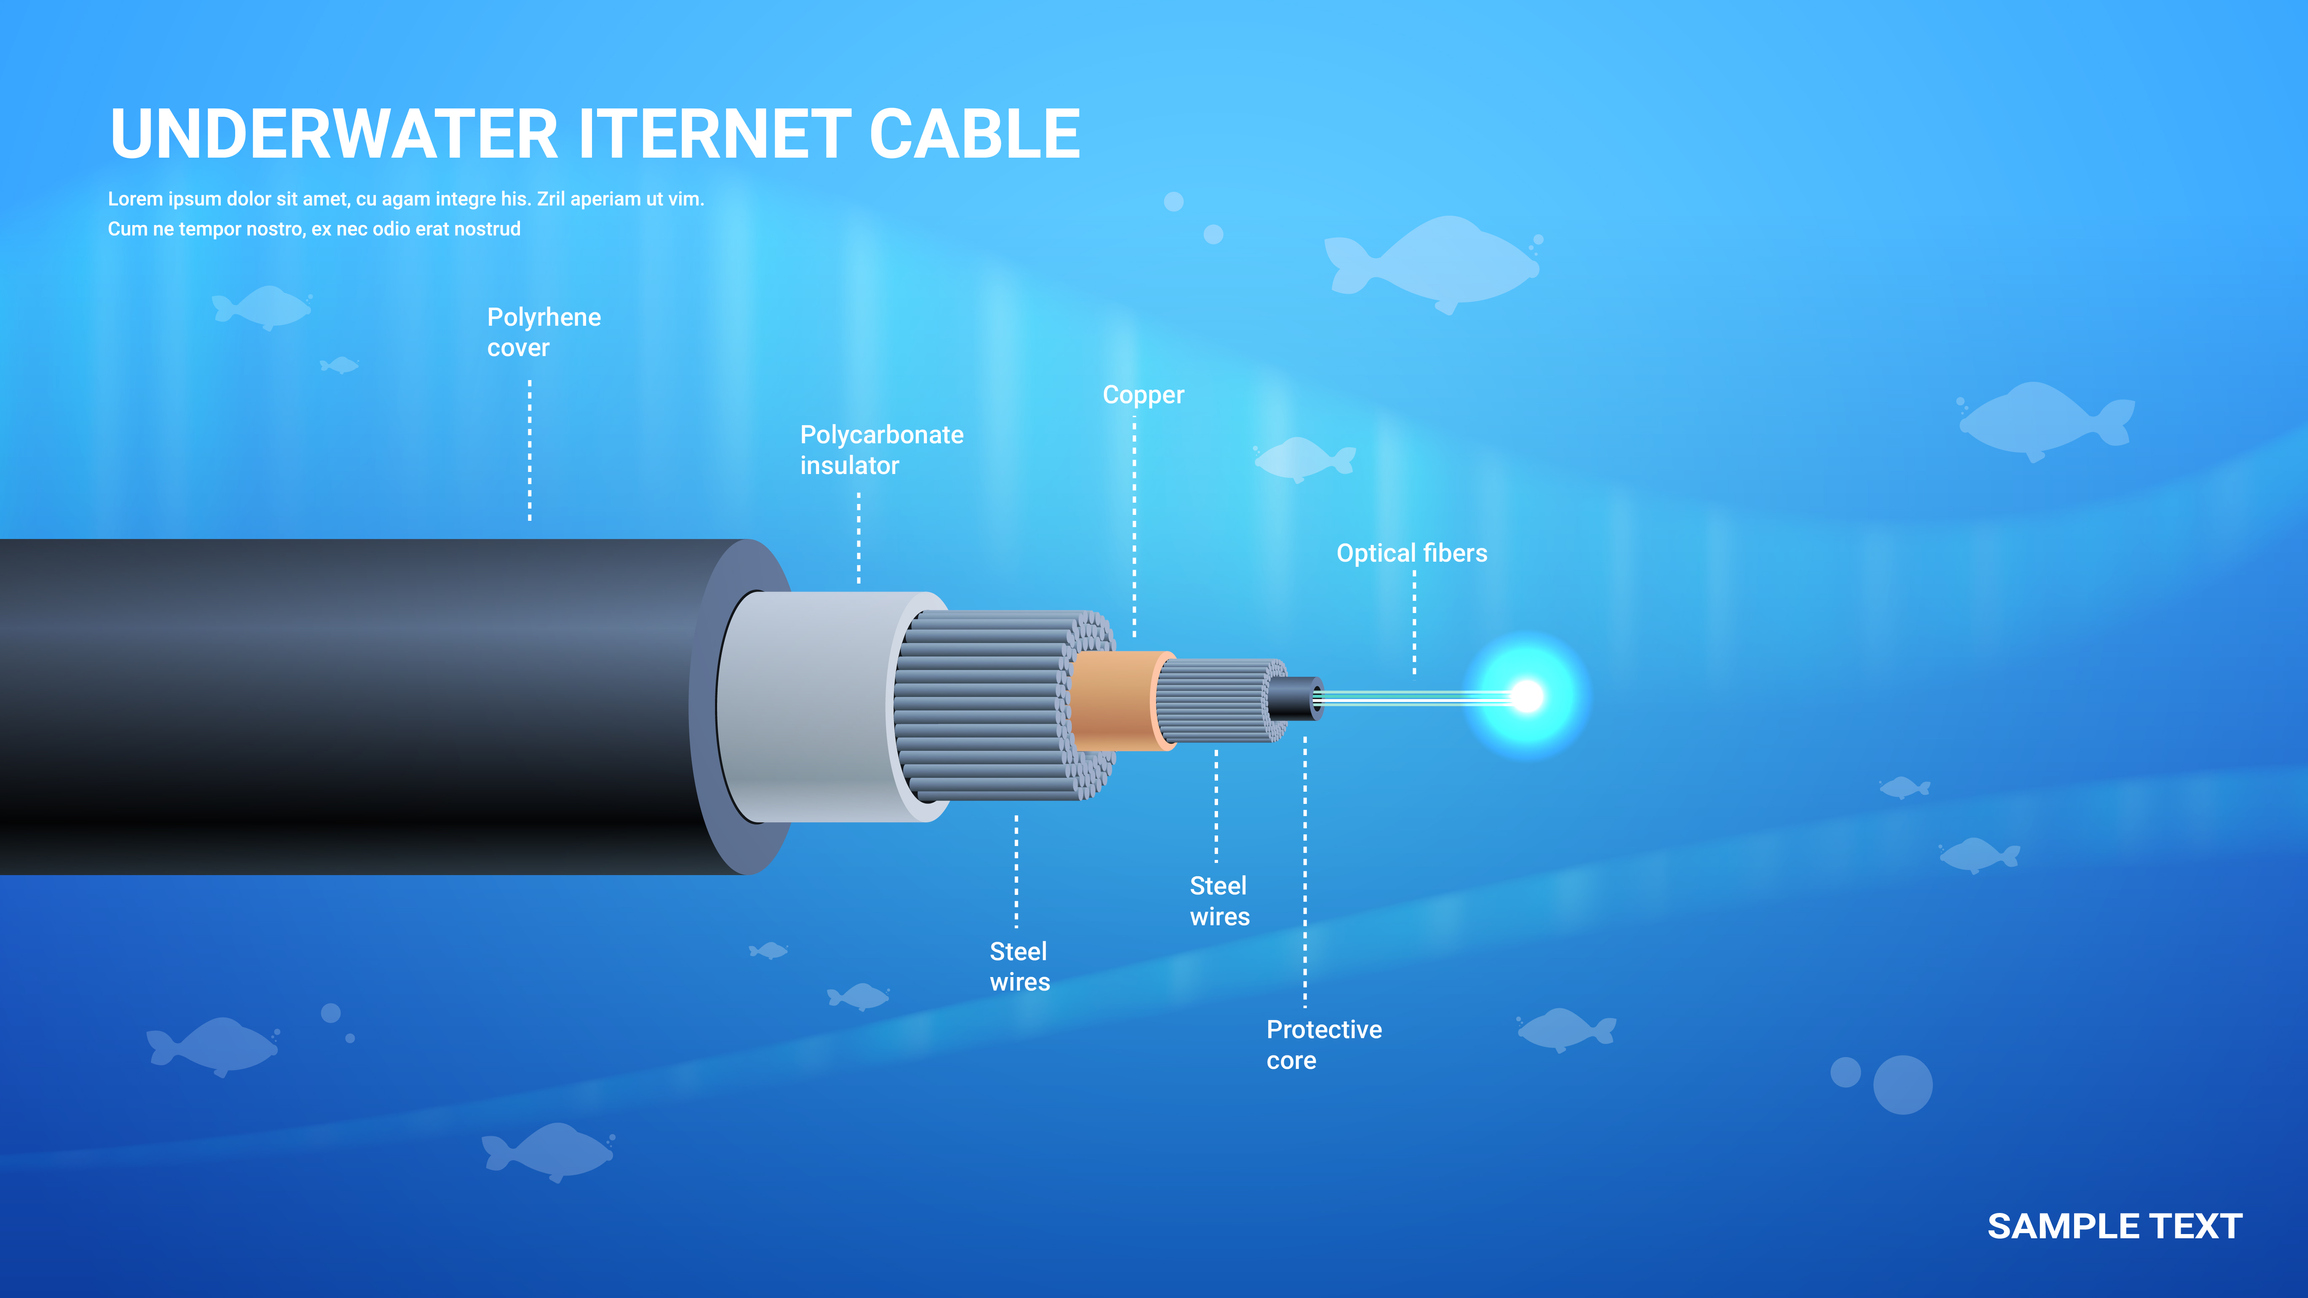 Subsea Cable Visual 2